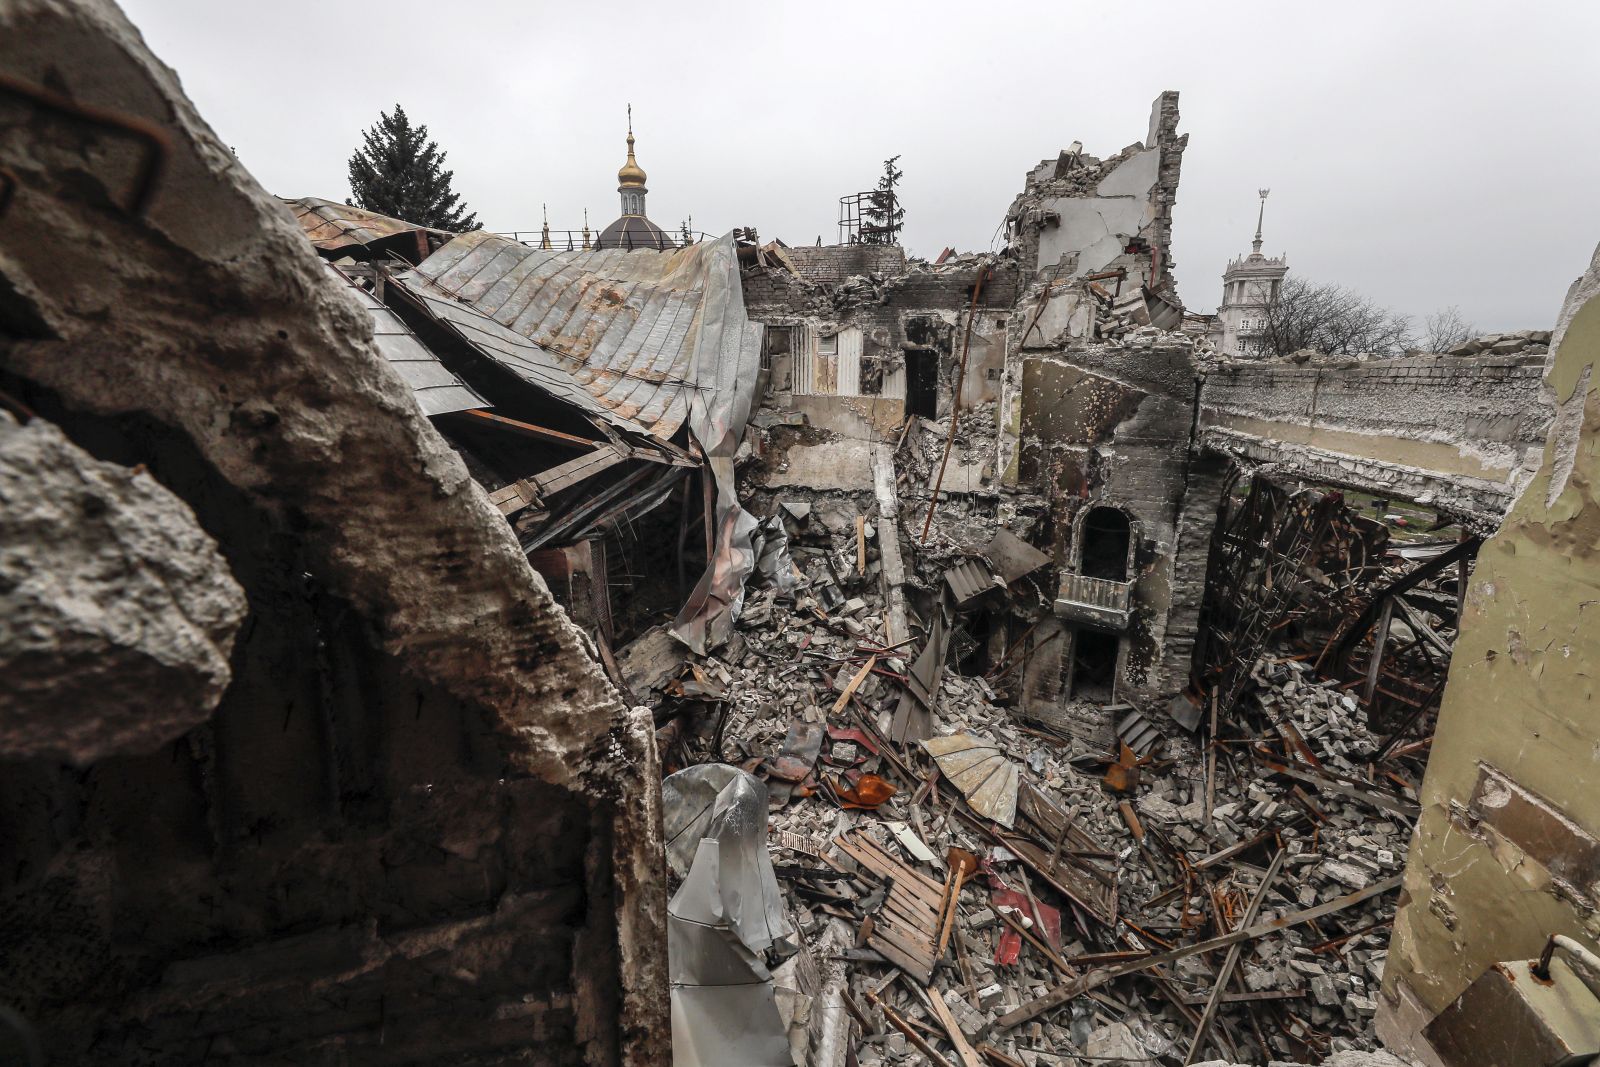 epa09886355 A picture taken during a visit to Mariupol organized by the Russian military shows destruction inside the destroyed Drama Theatre in Mariupol, Ukraine, 12 April 2022. At least 300 people died after a Russian airstrike on the Drama Theatre of Mariupol on 16 March, the Donetsk Regional State Administration sai whereas the Russian Defence Ministry denies the airstike and claims the theatre was blown up by the Azov battalion. Some 133,214 people, including two thousand people over the past day, left Mariupol through the gum corridor in the eastern direction, according to the head of the Russian National Defense Control Center.  EPA/SERGEI ILNITSKY